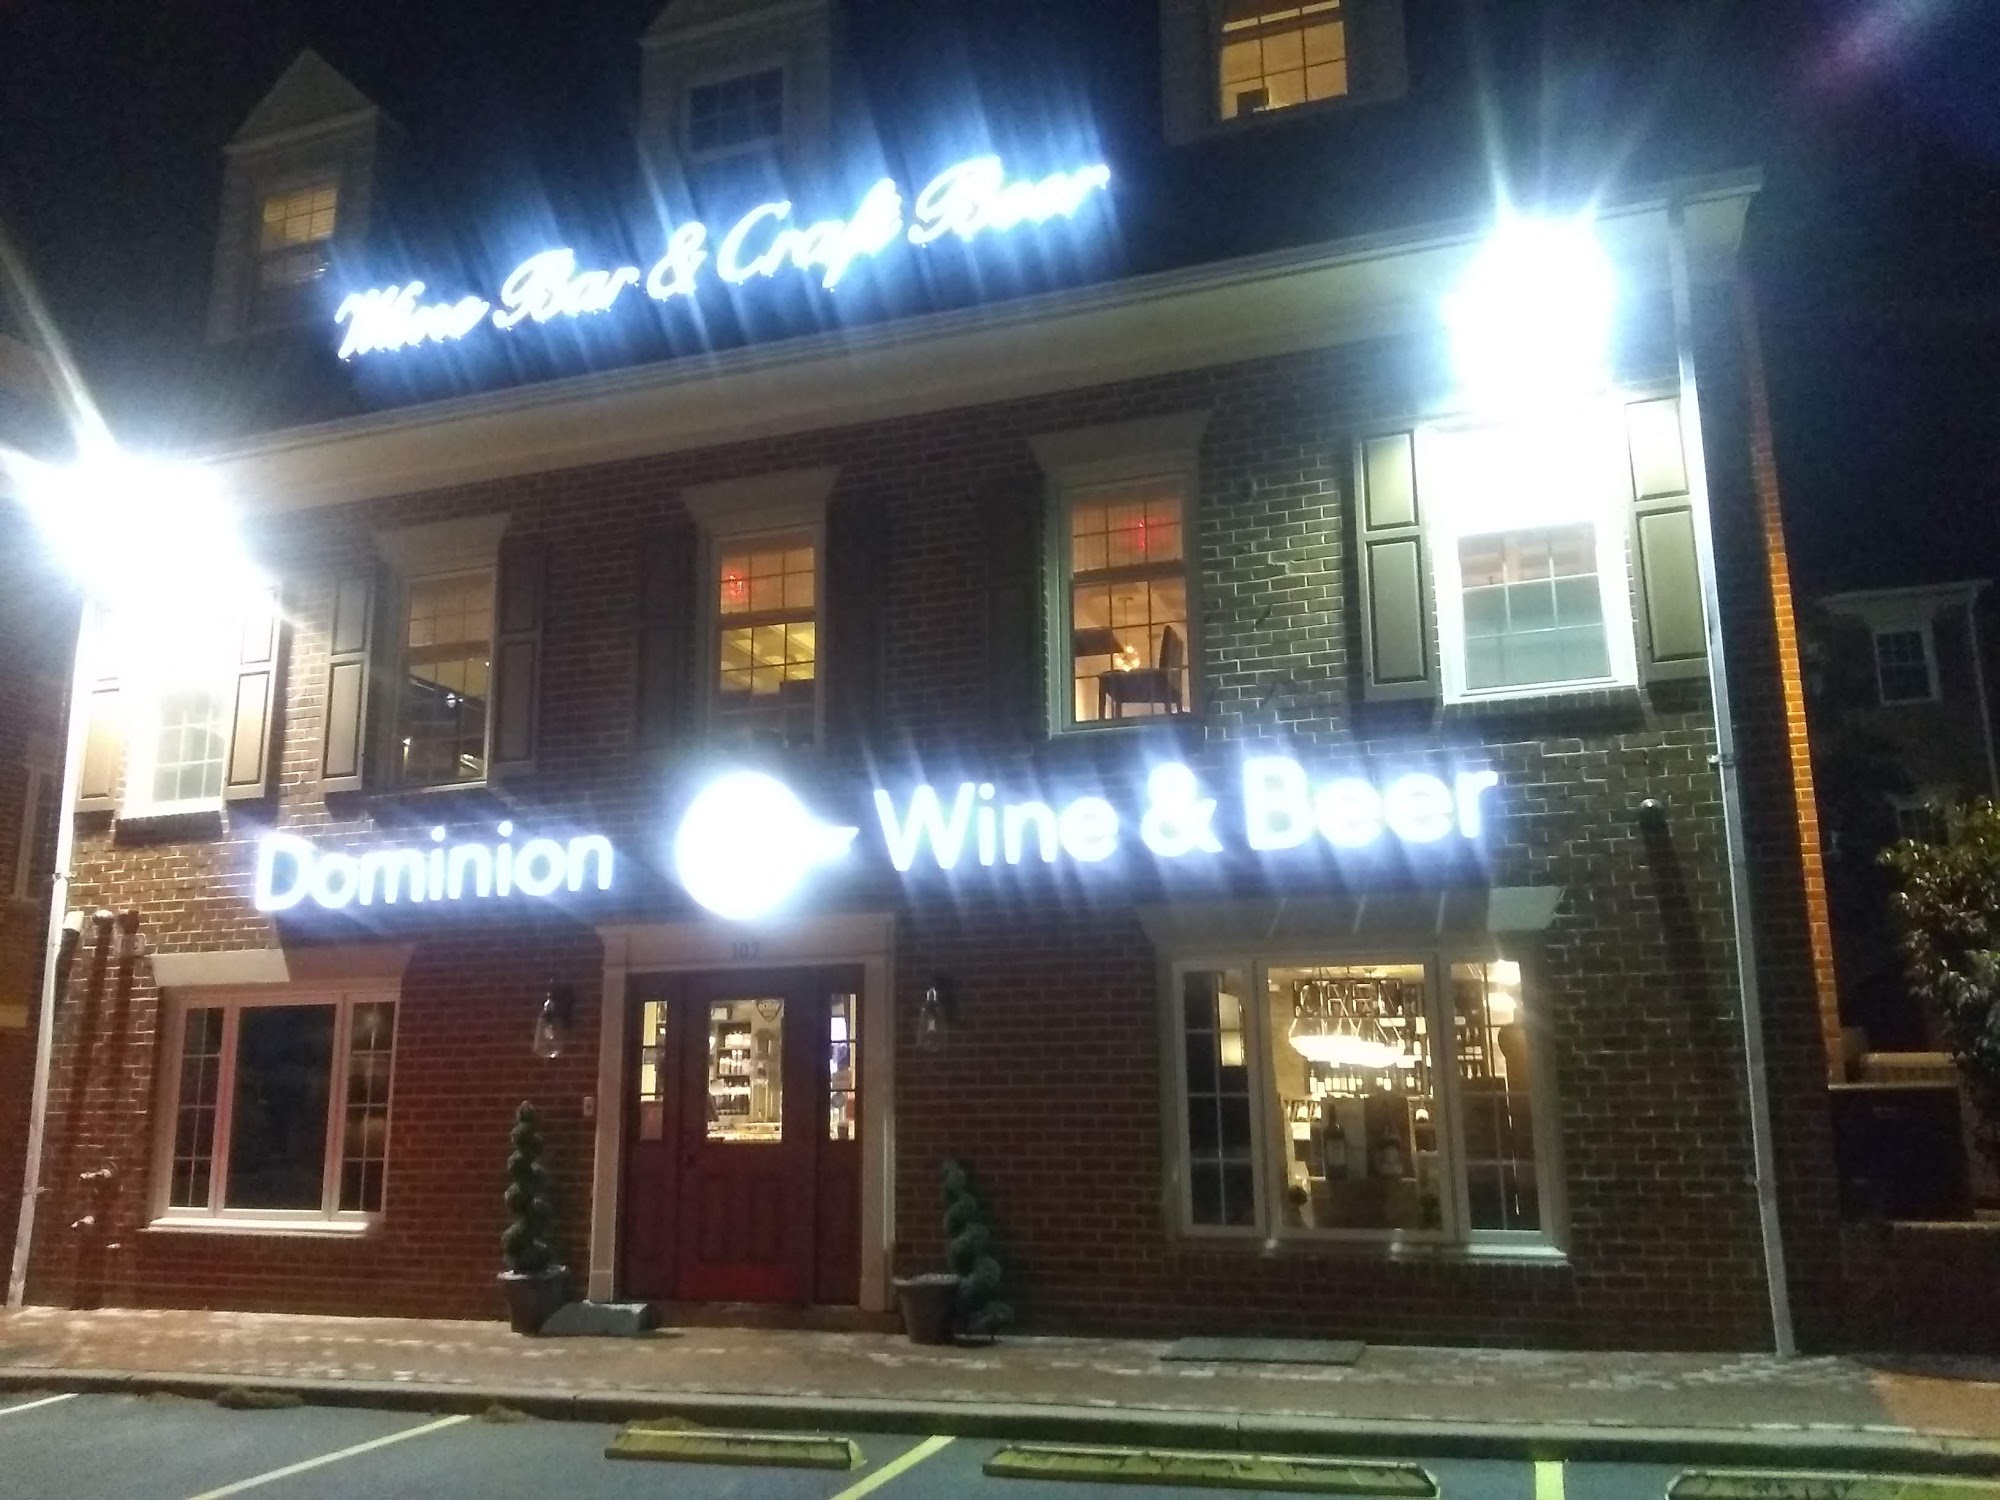 Dominion Wine and Beer